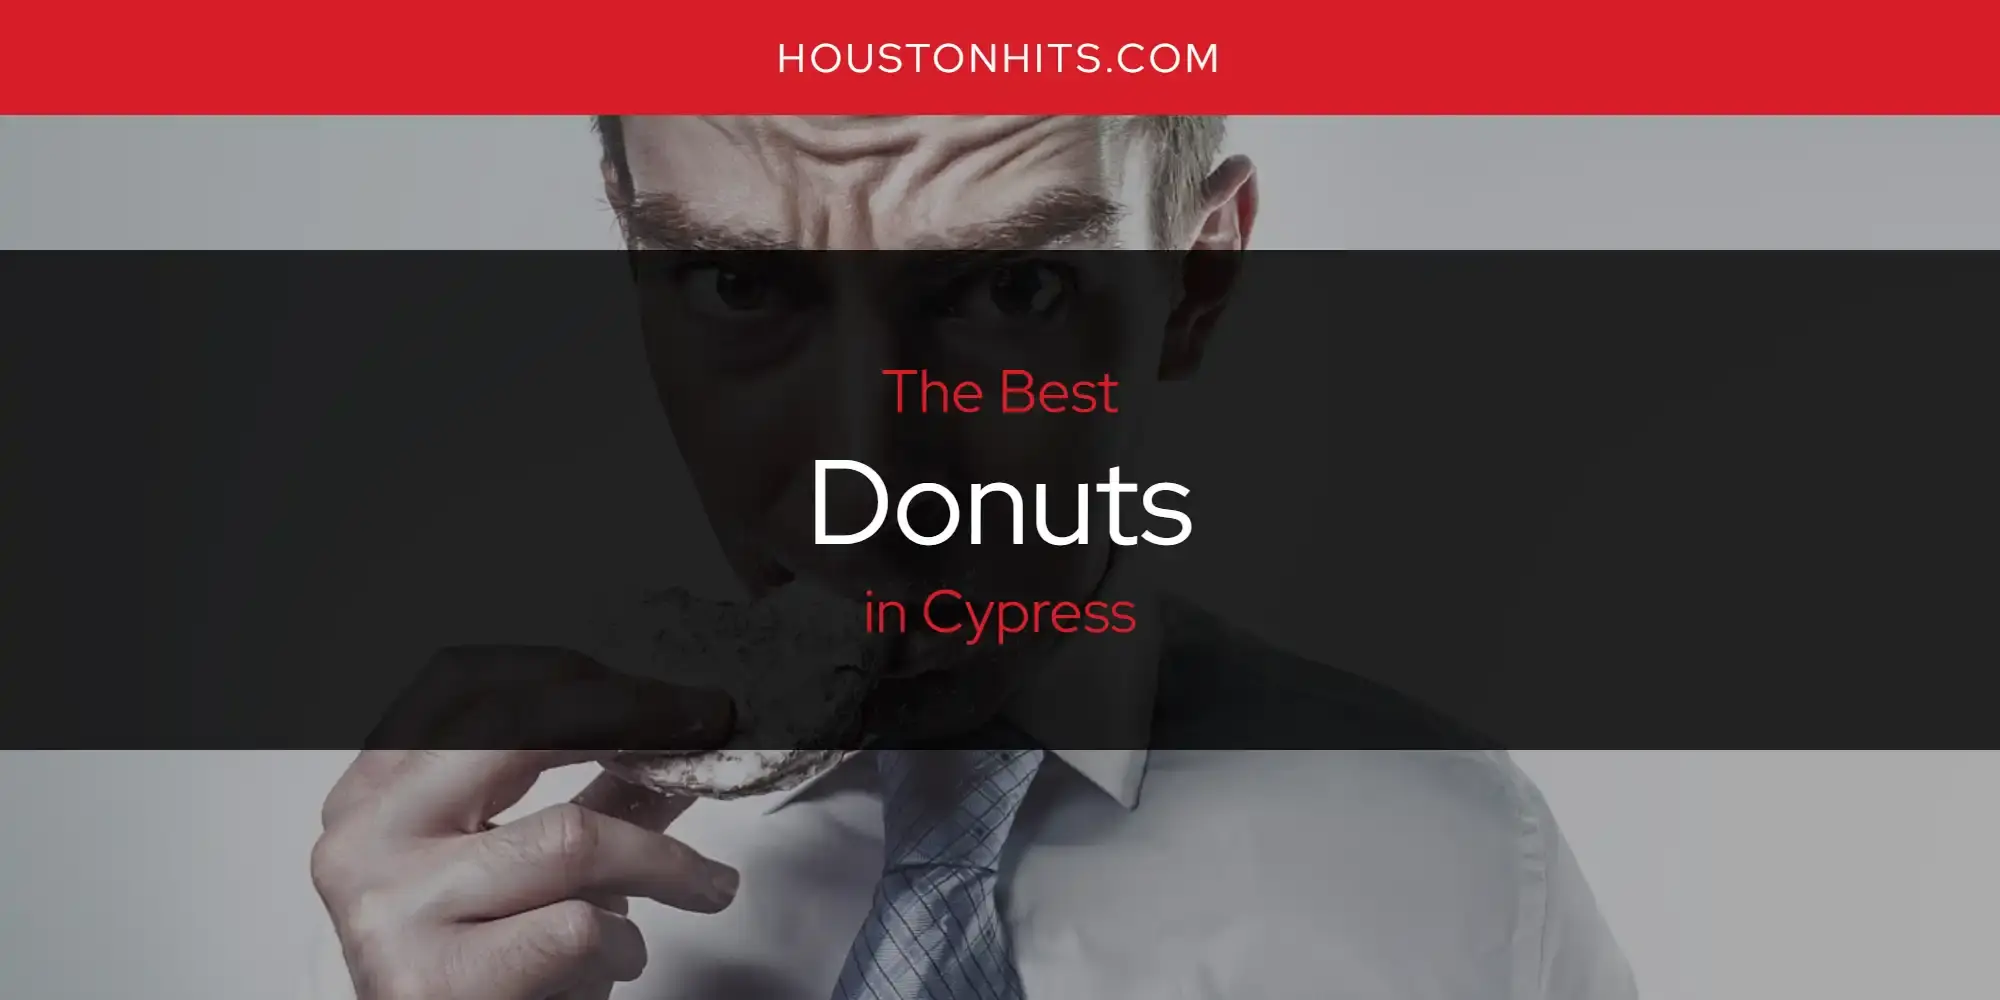 Best Donuts in Cypress? Here's the Top 17